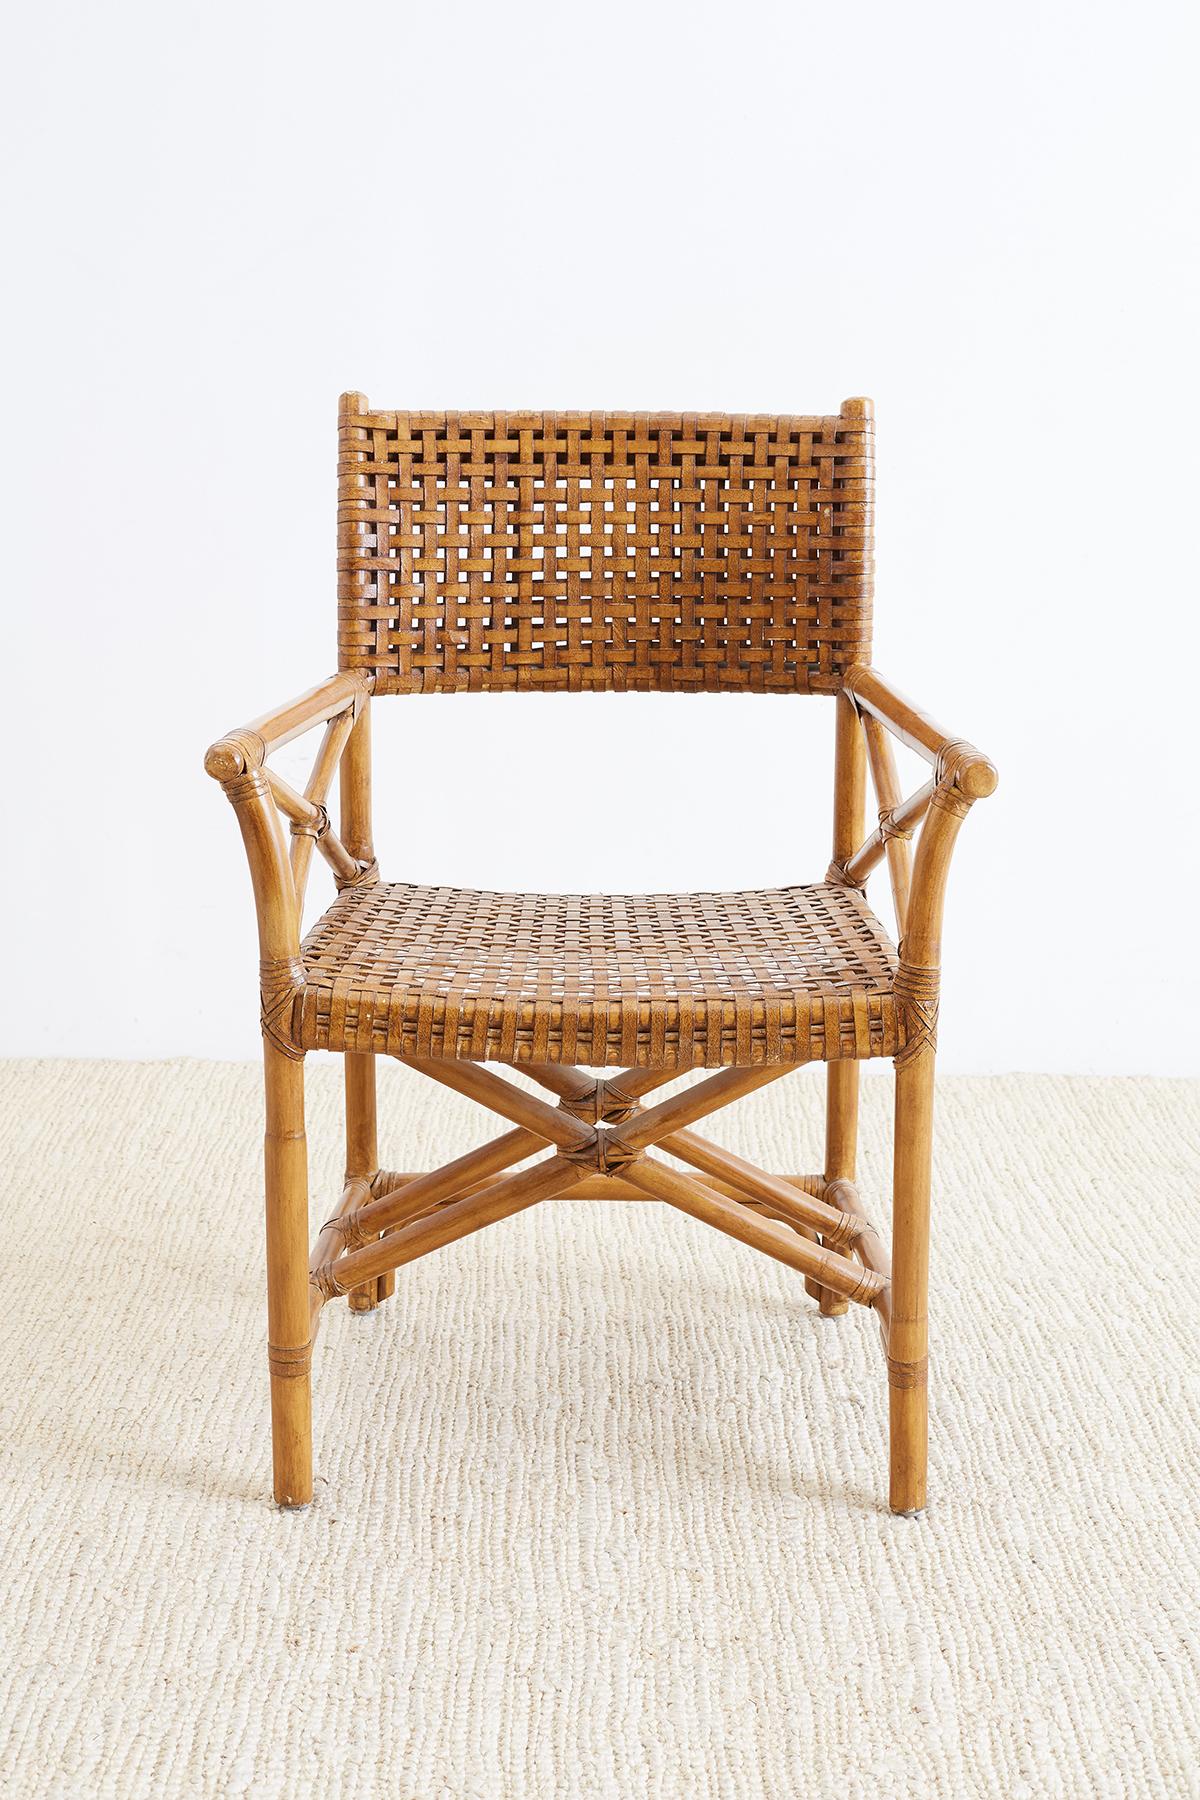 mcguire cane chairs